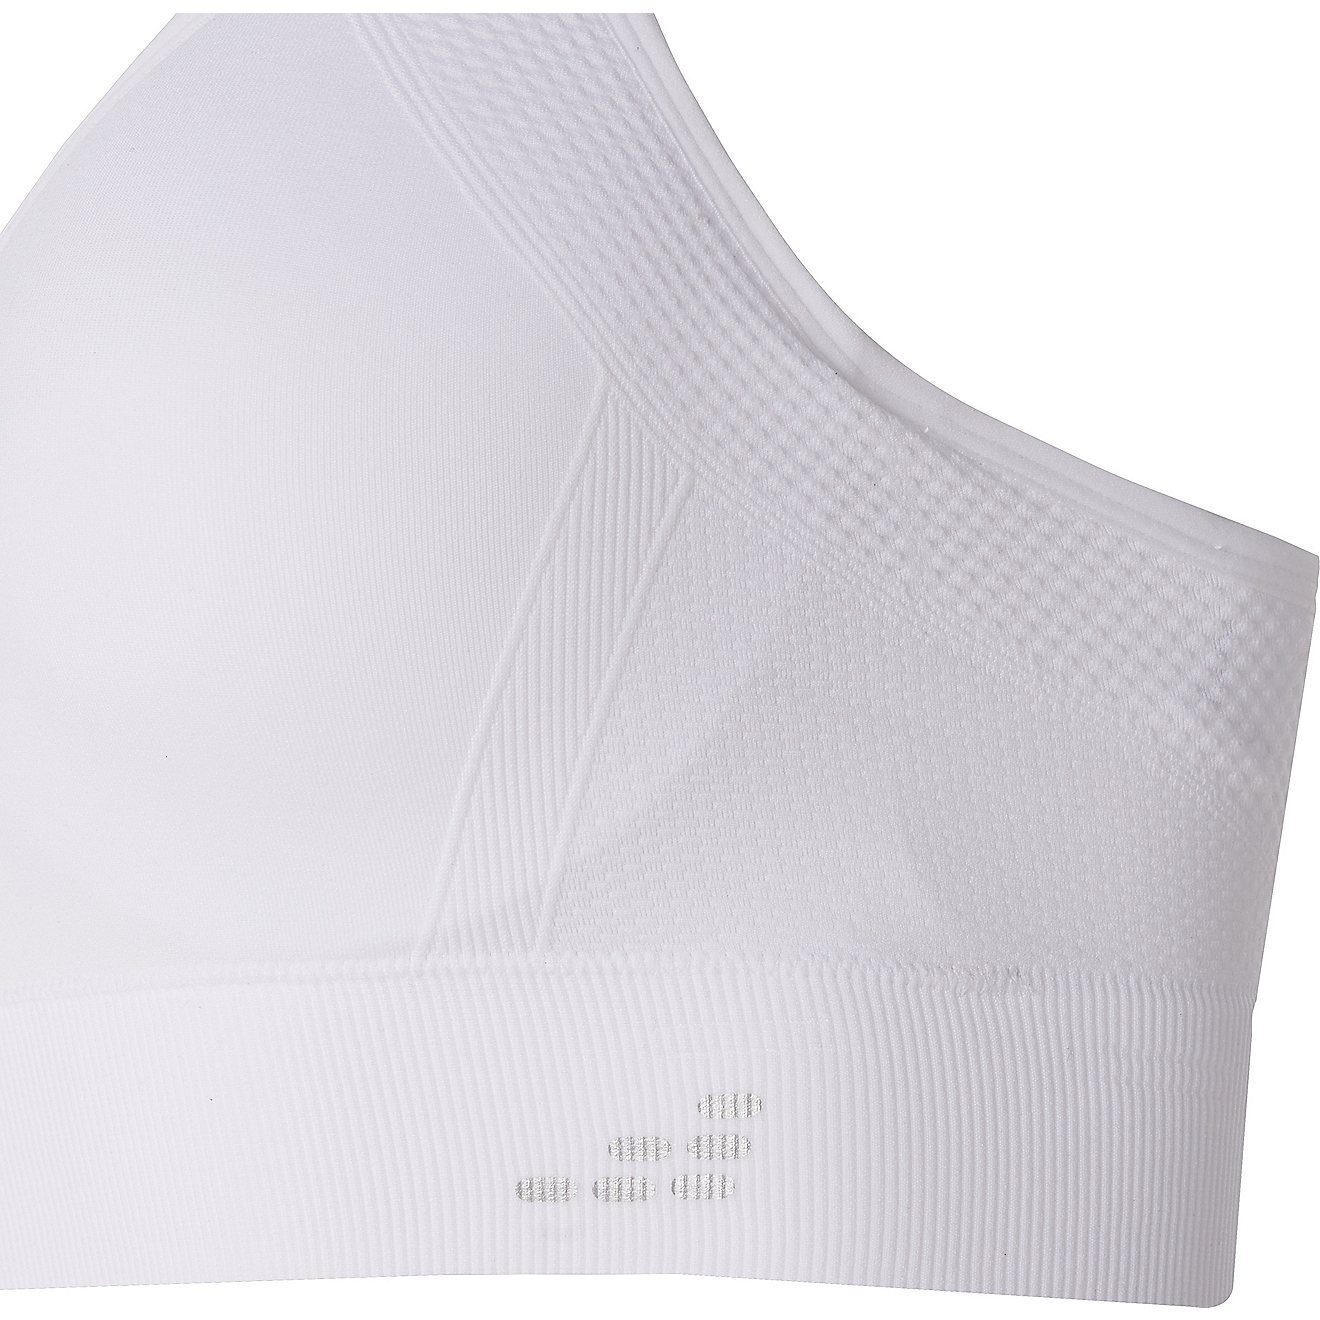 Myprotein MP Women's High Support Moulded Cup Sports Bra - White - 30D